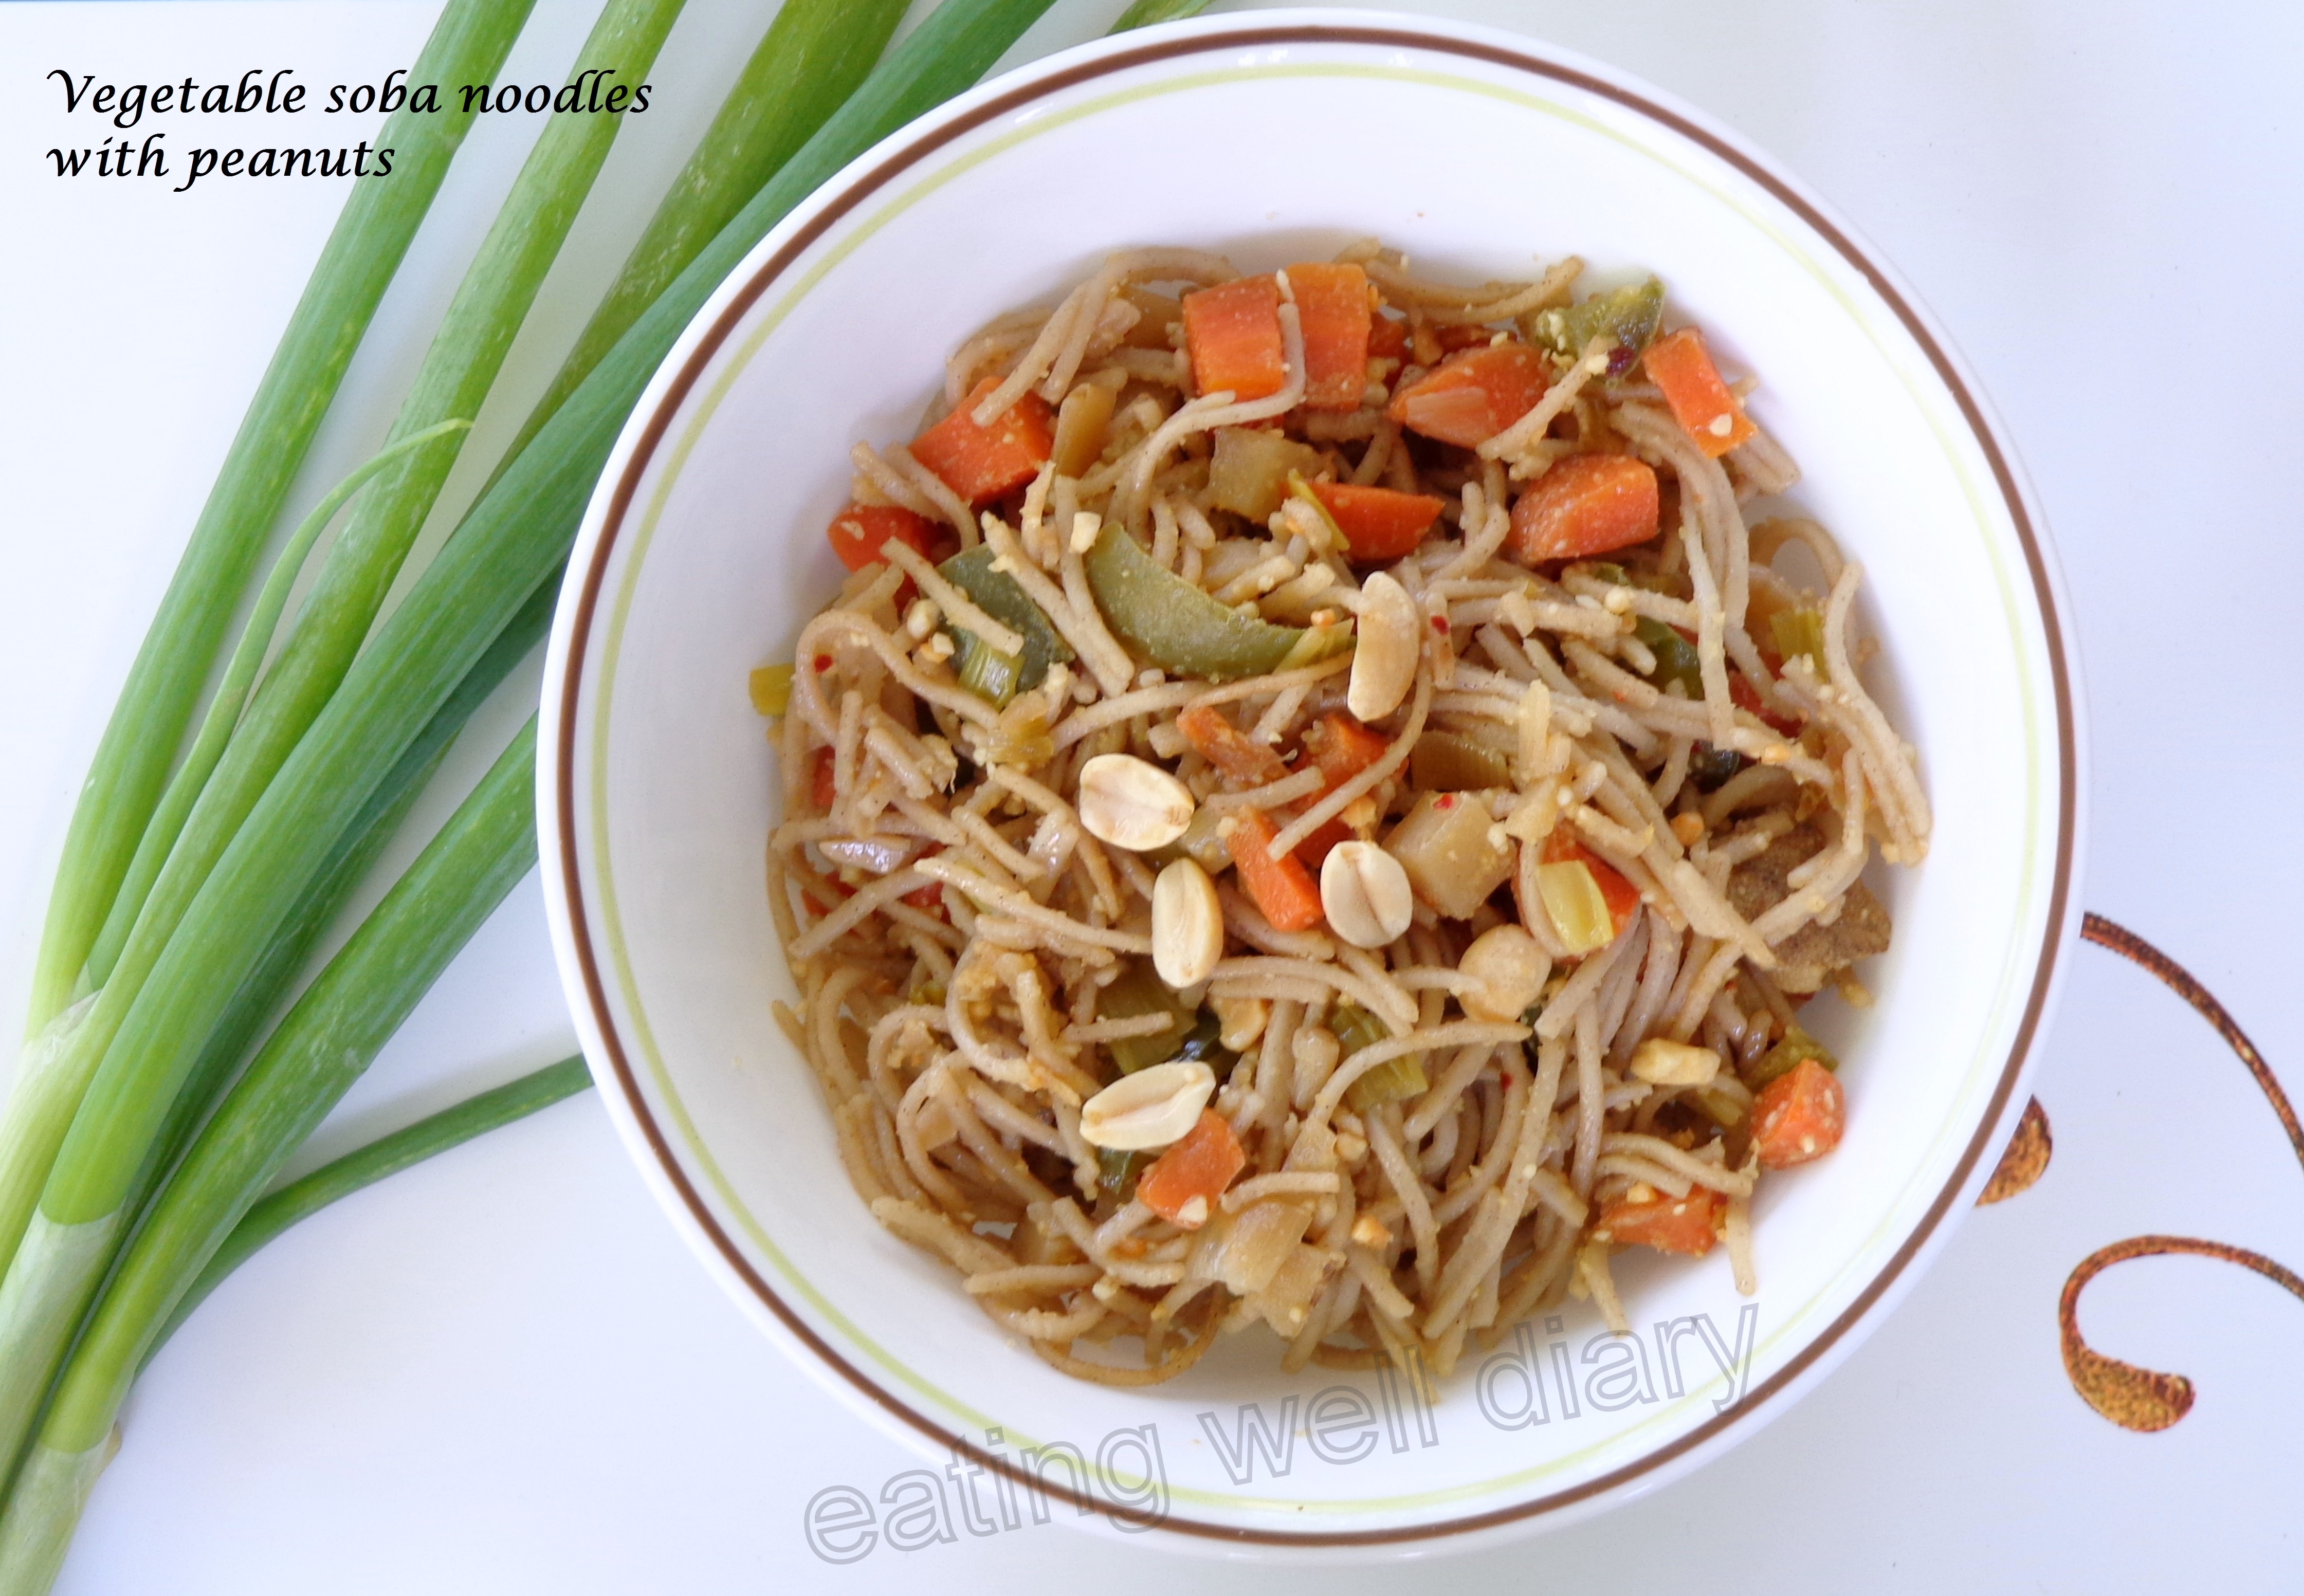 Vegetable soba noodles with peanuts